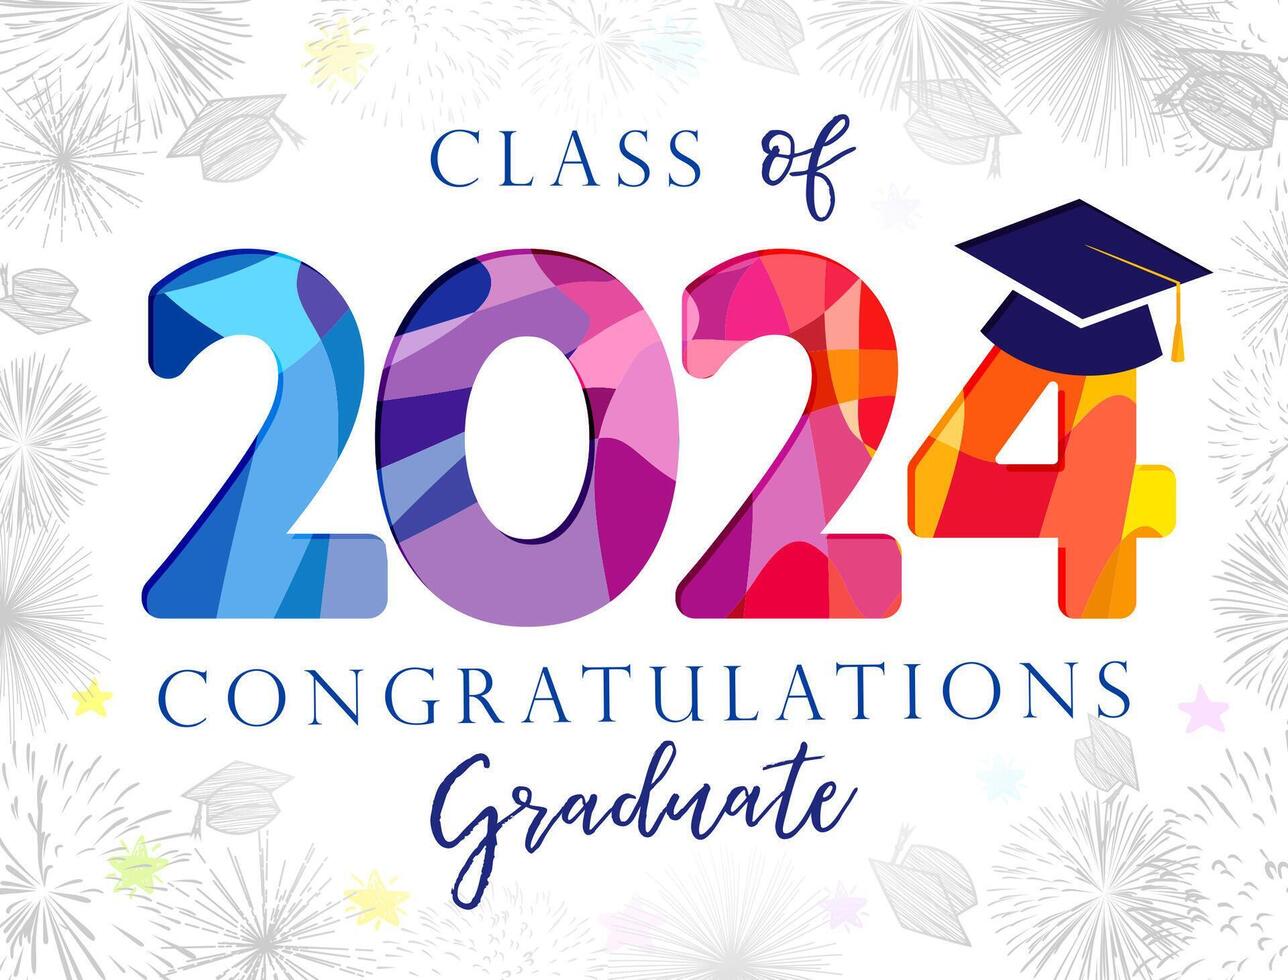 Cute graduating postcard for class of 2024 graduates. Invitation design. Educational festive background and trendy number with academic cap, Handdrawn style elements. vector